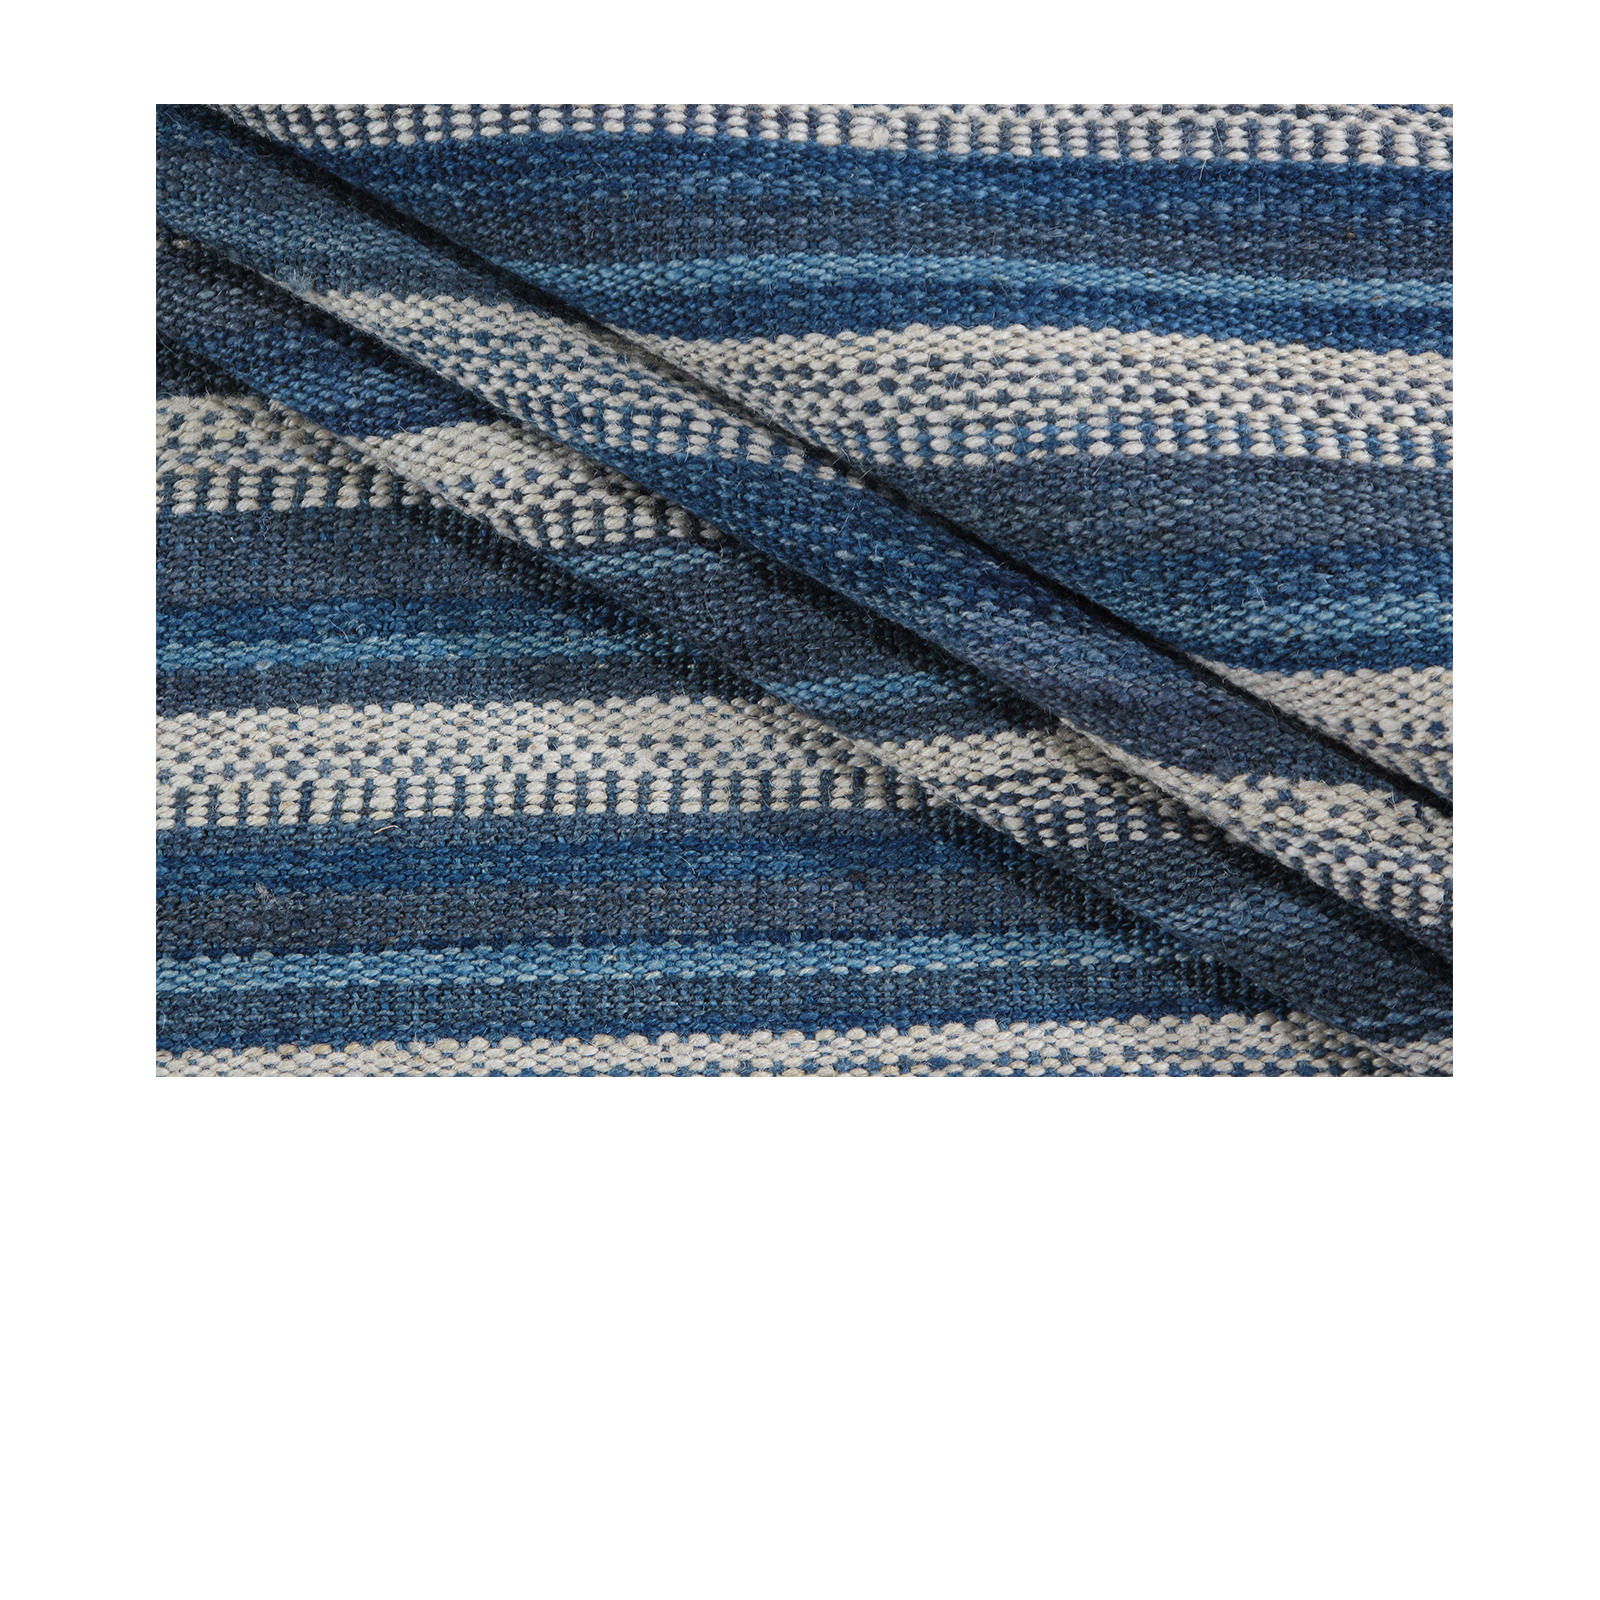 Hand Made and Hand Woven Flat Weave